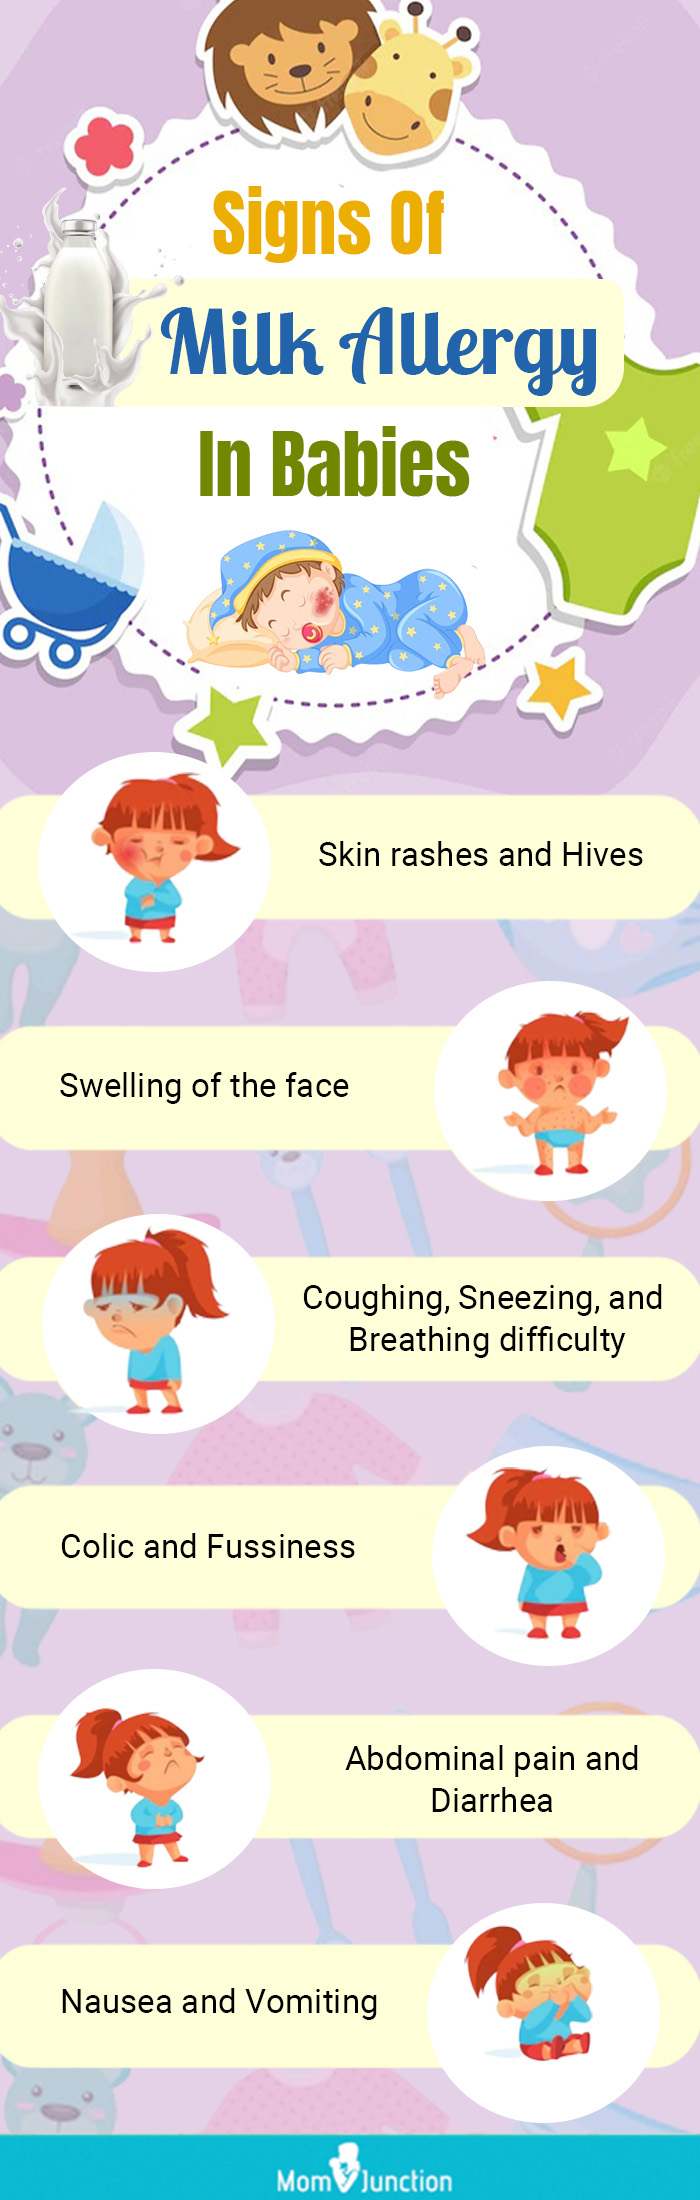 signs of milk allergy in babies (infographic)